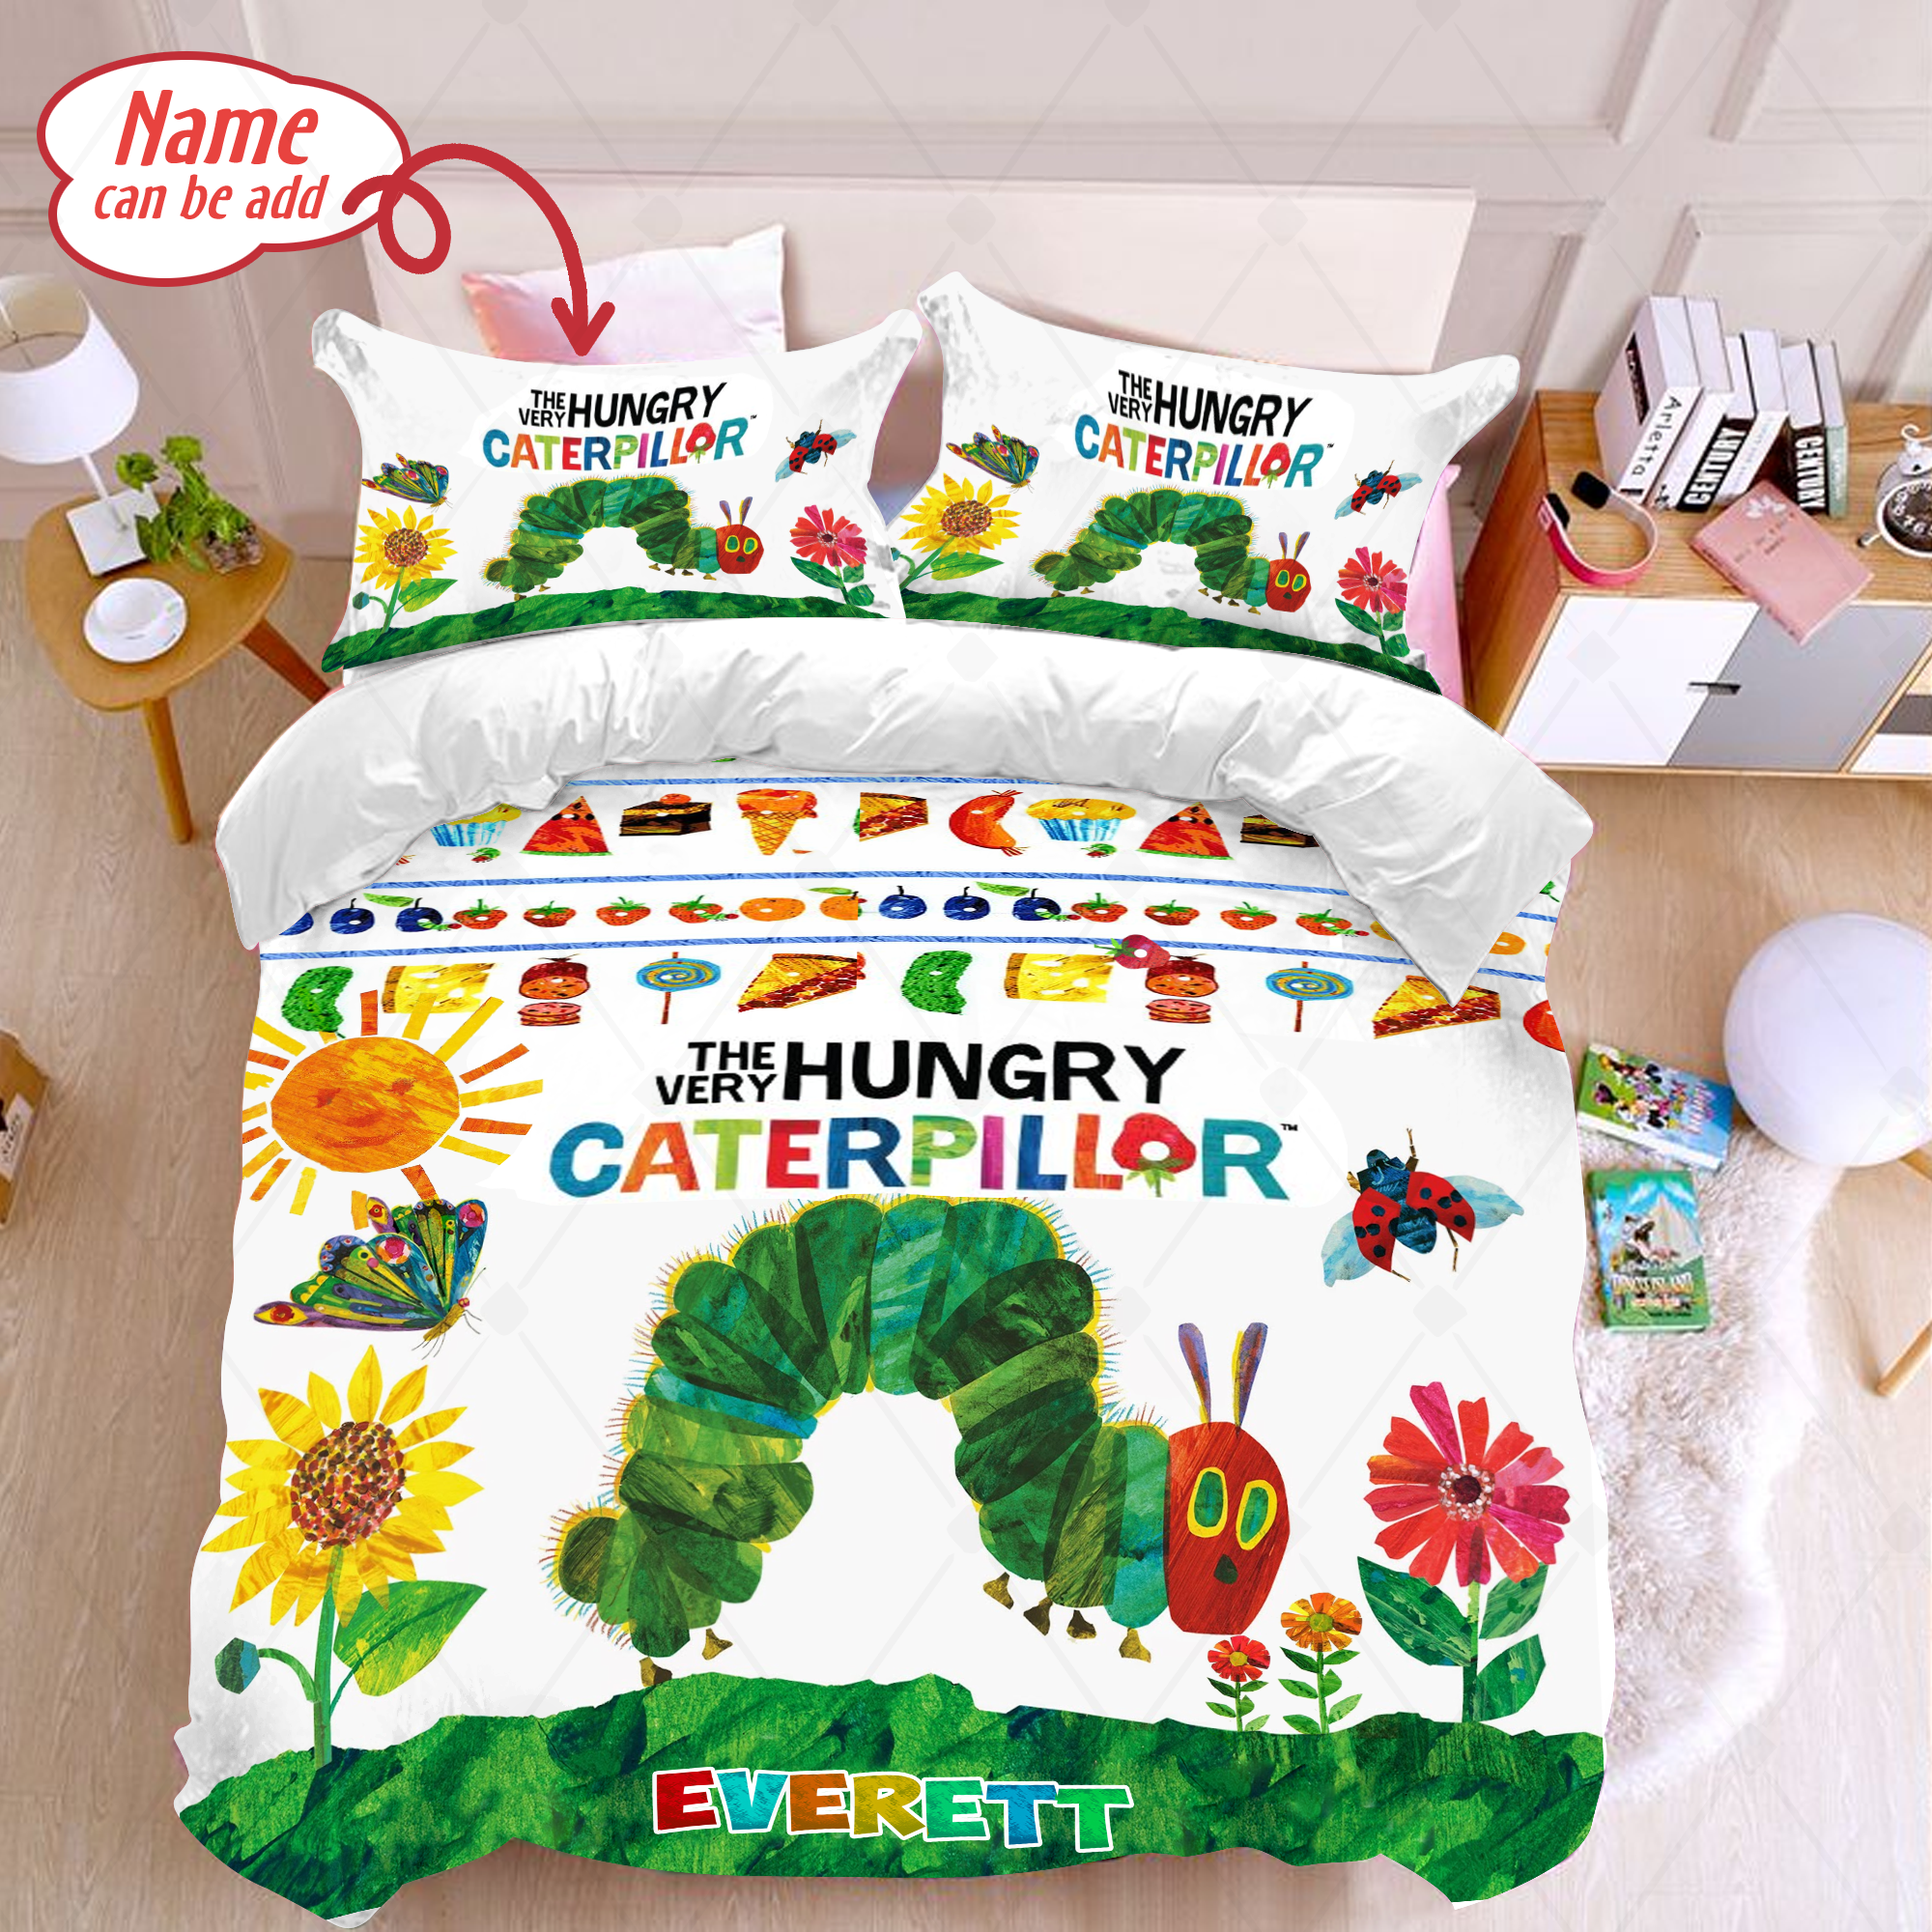 Personalized The Very Hungry Caterpillar Duvet Cover And Pillowcase Hungry Caterpillar Bedding Set Kids Bedding Sets Eric Carle Fan Gifts